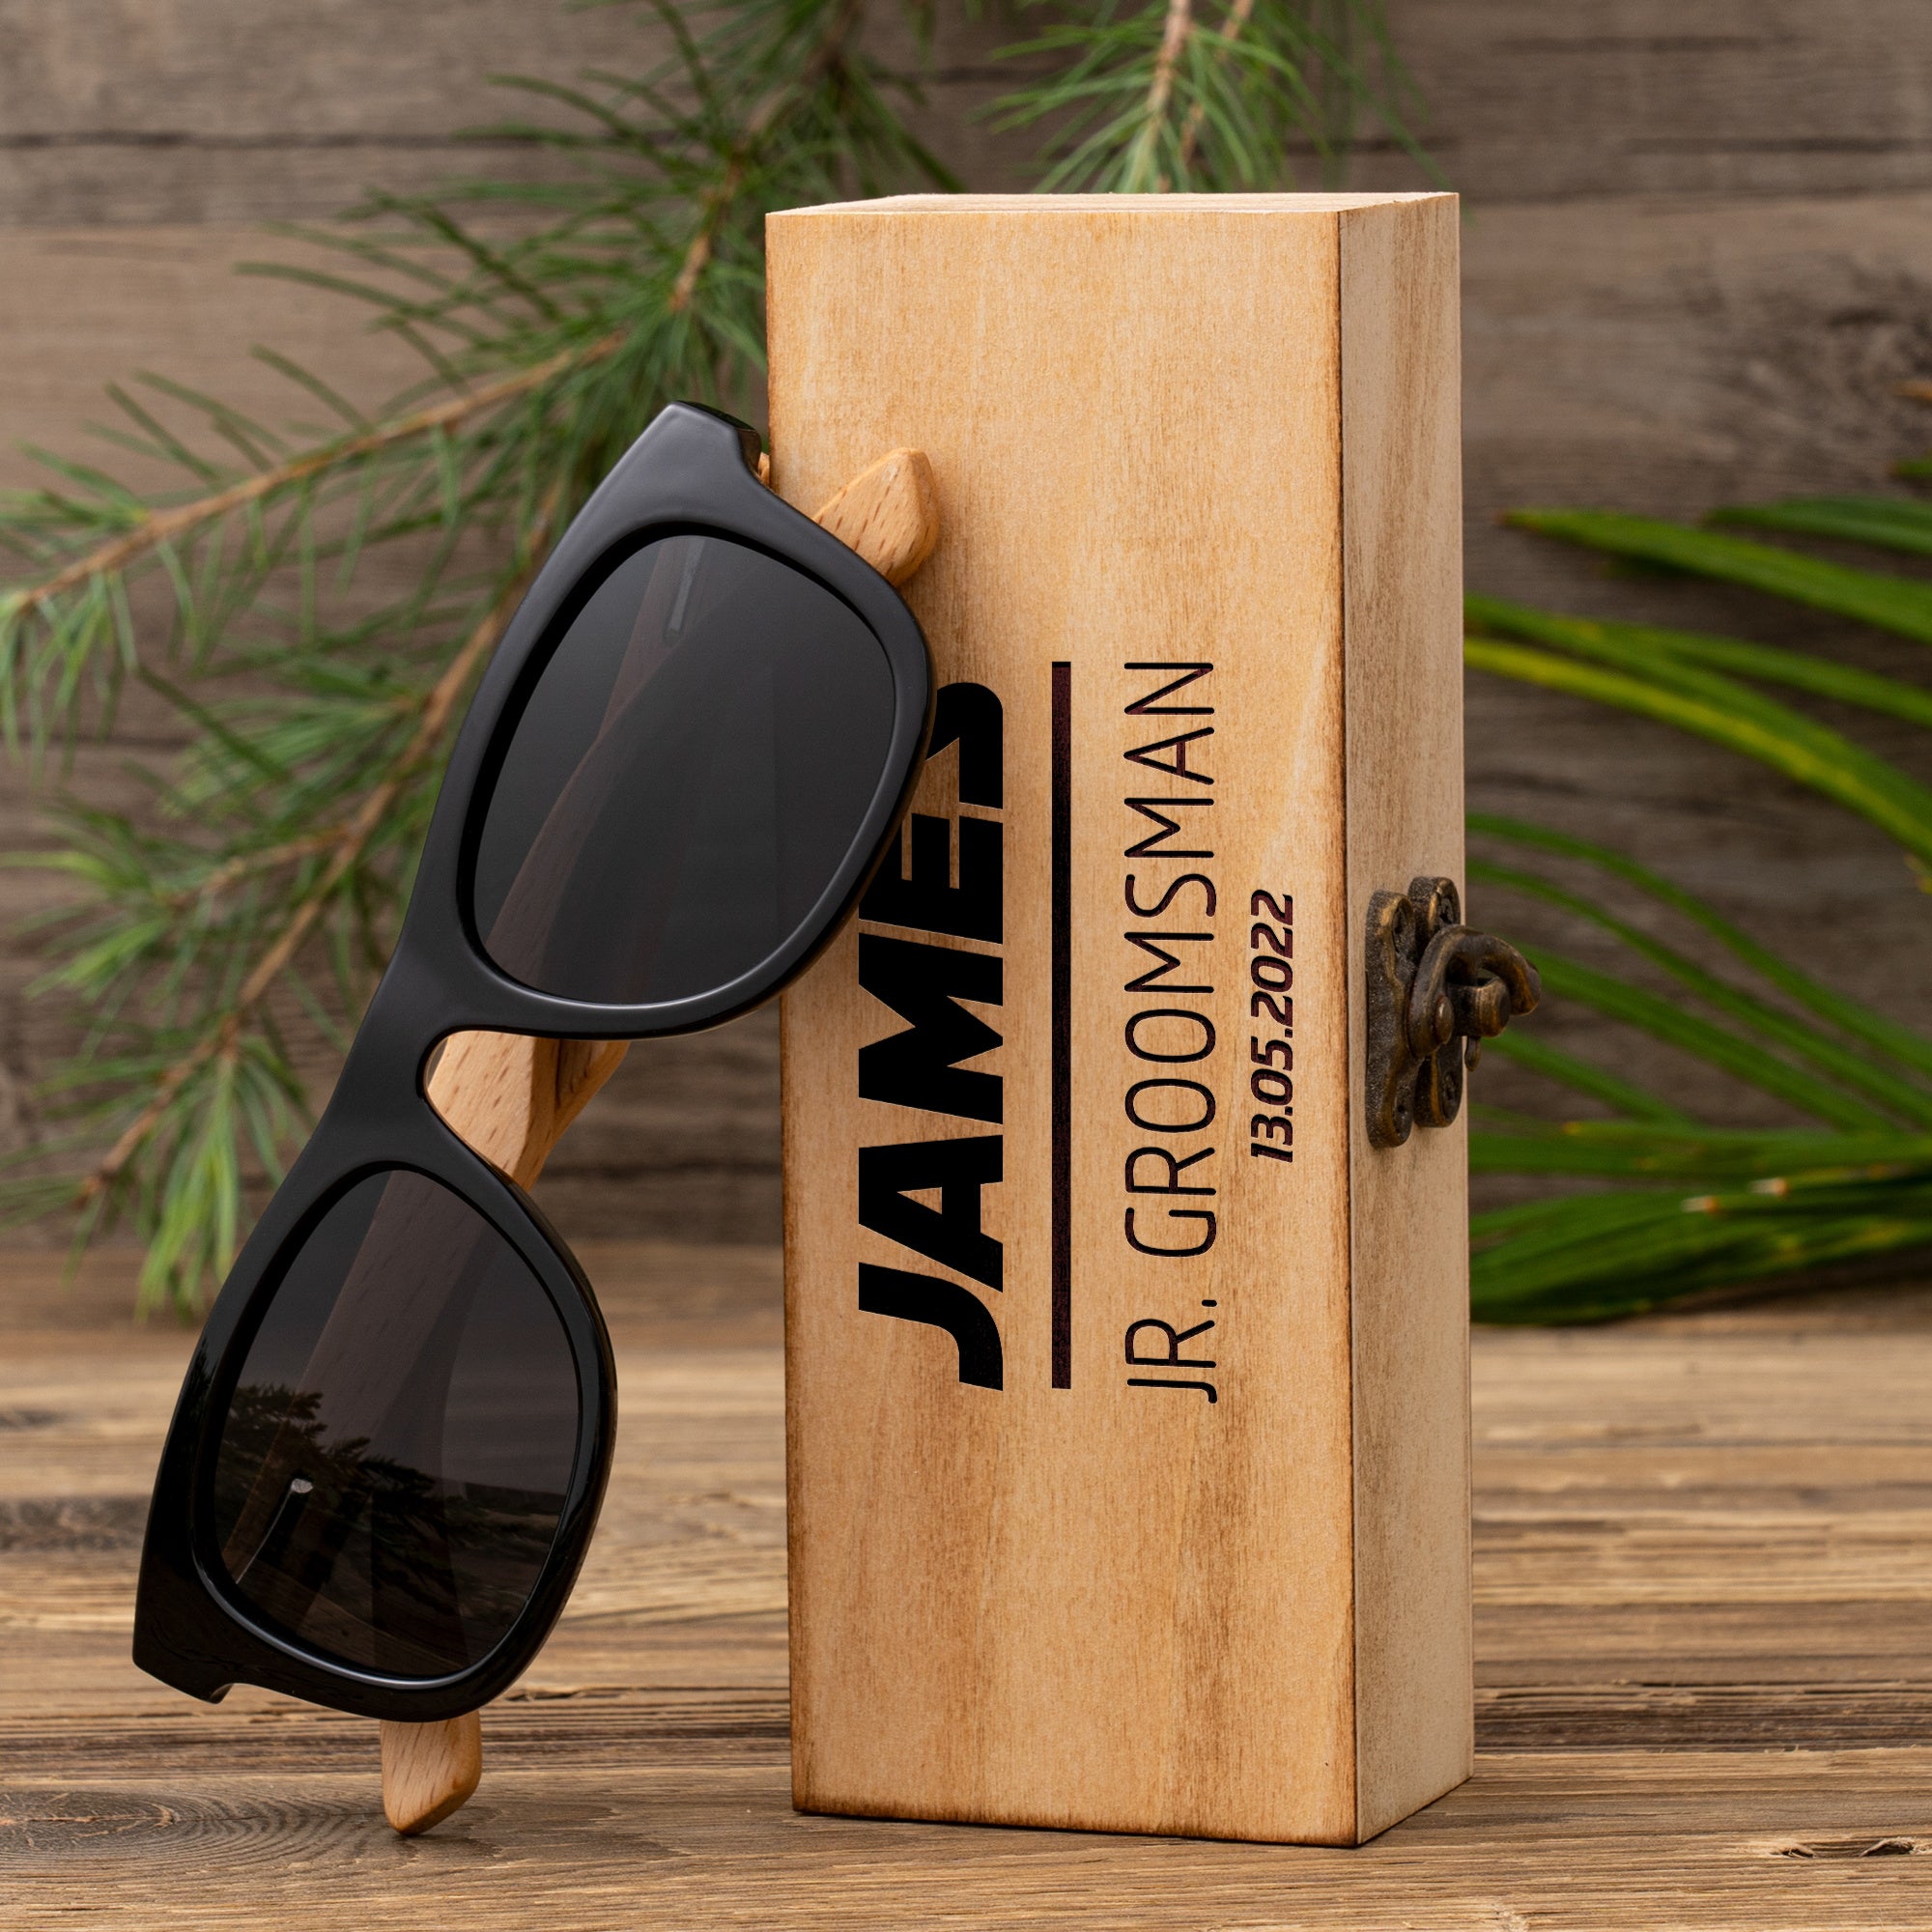 Personalized Wooden Sunglasses for Men, Groomsmen Gifts, Custom Sunglasses, Groomsmen Proposal, Wedding Gifts for Guys, Bachelor Party Gift Father